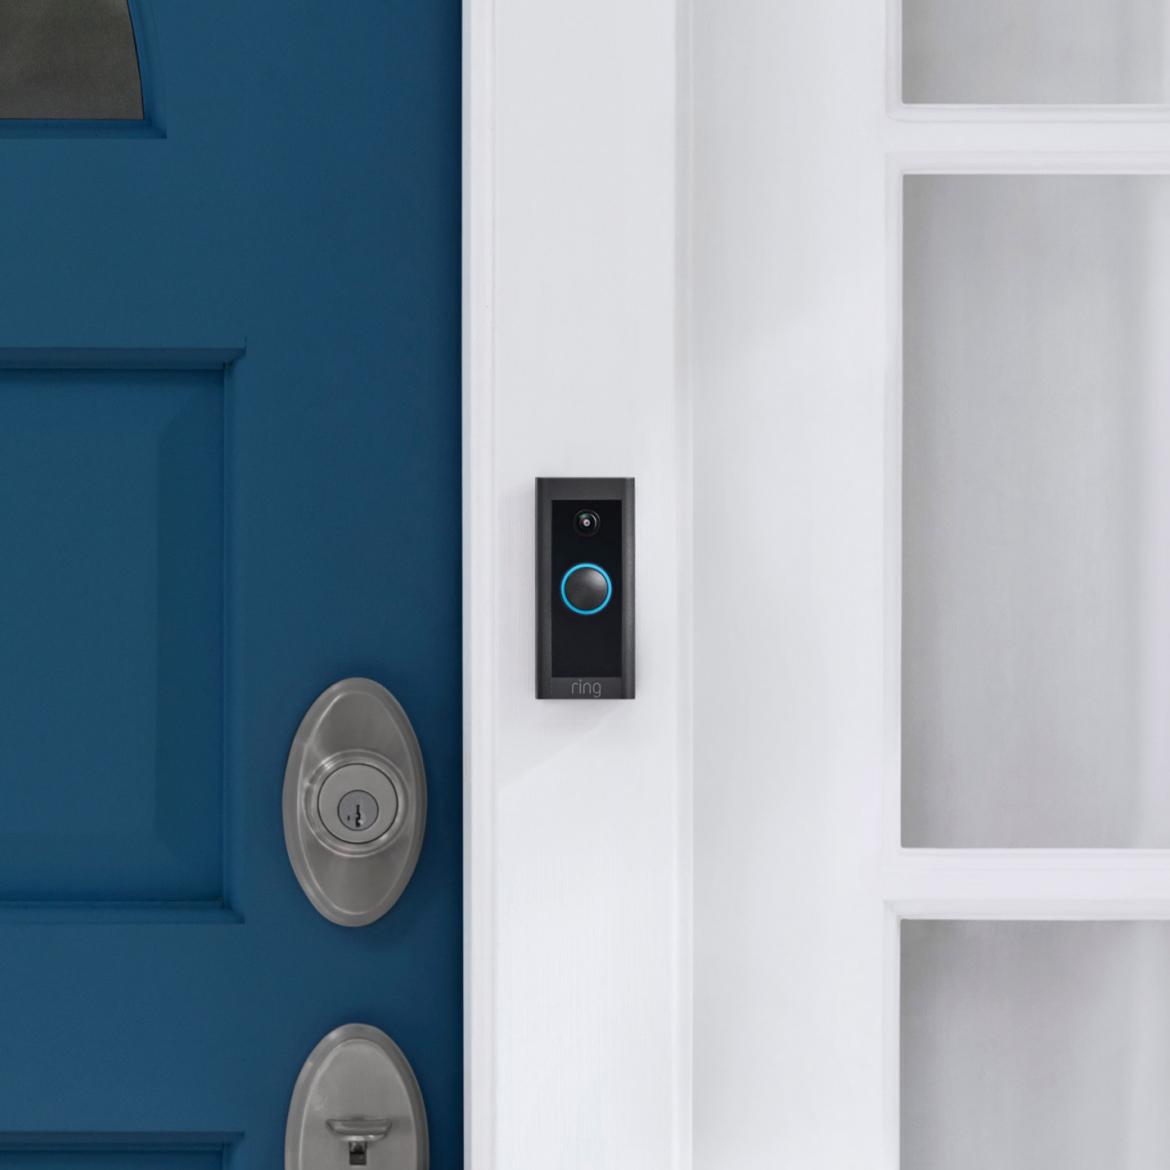 Ring Video Doorbell Wired installed